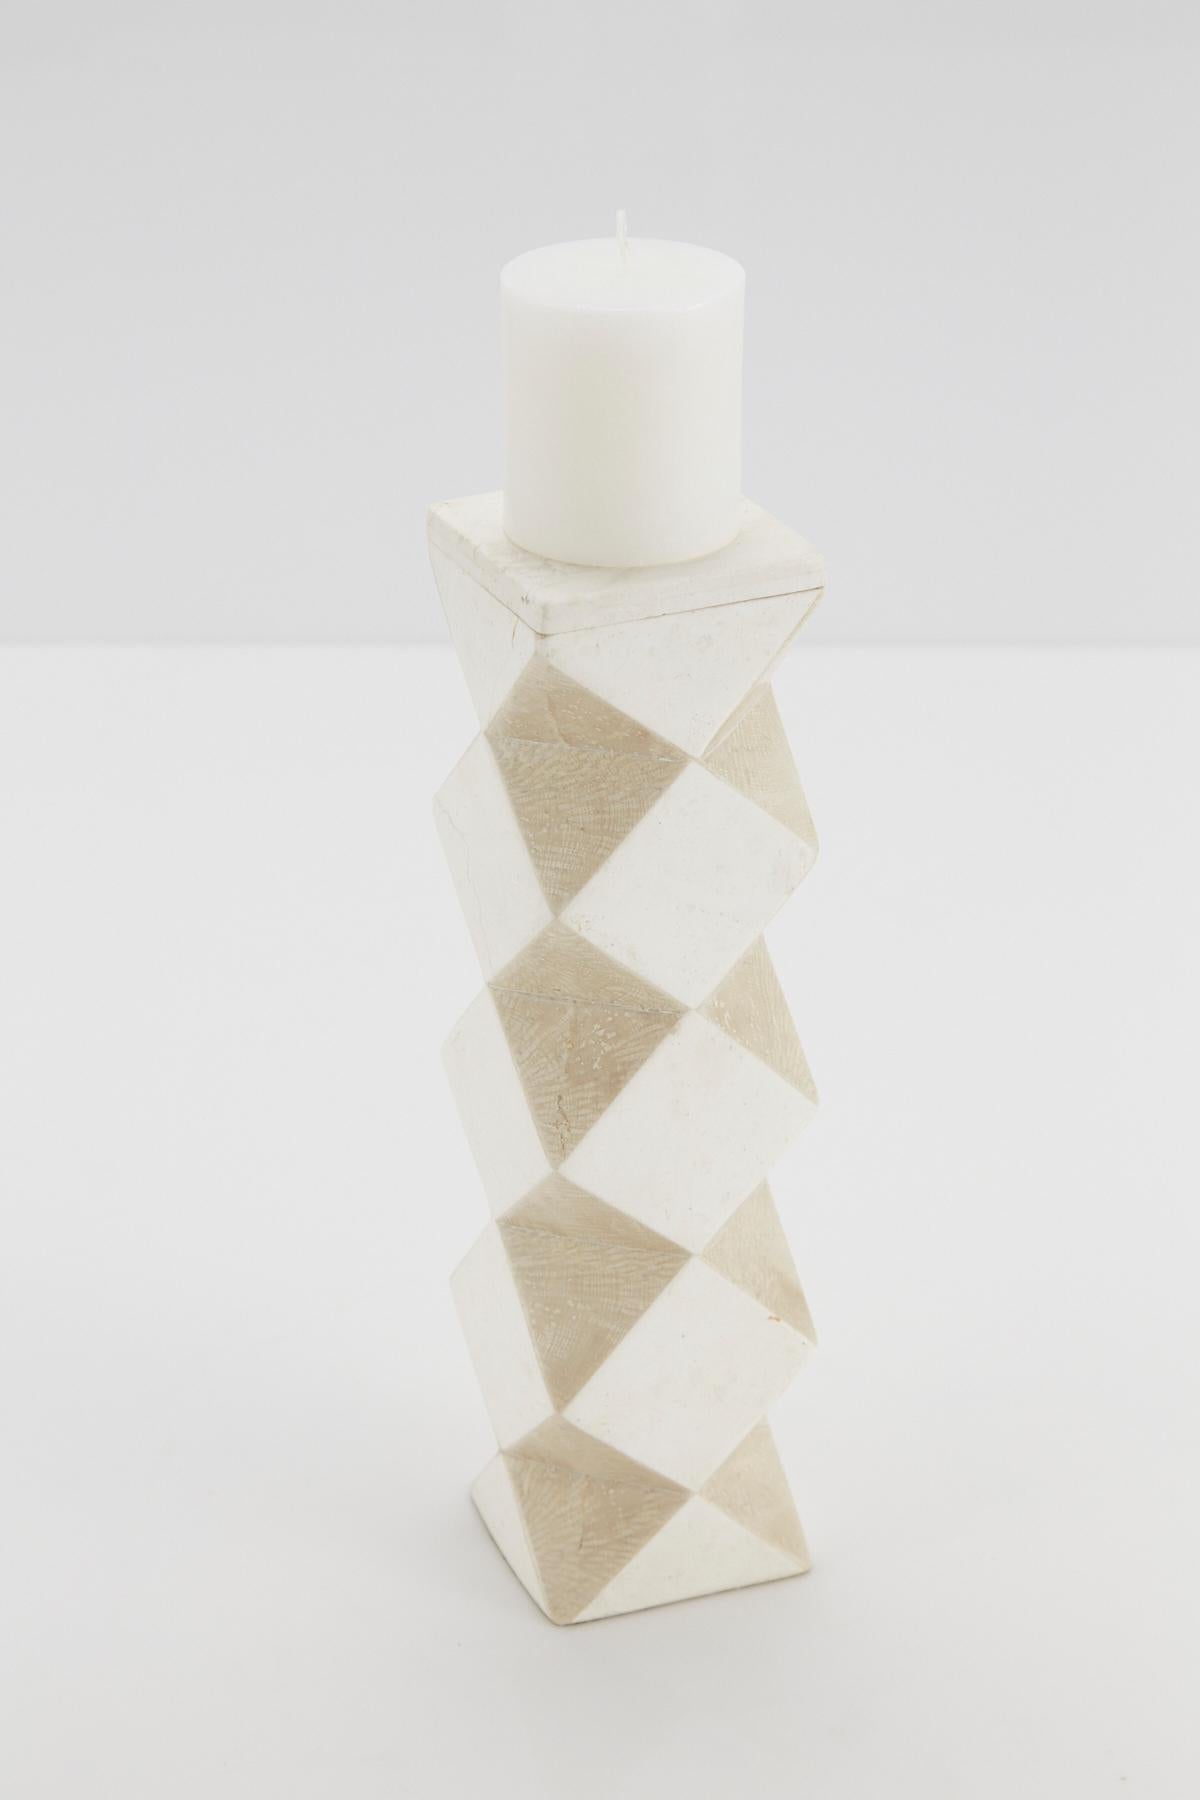 Philippine Convertible Faceted Postmodern Tessellated Stone Candlestick or Vase, 1990s For Sale